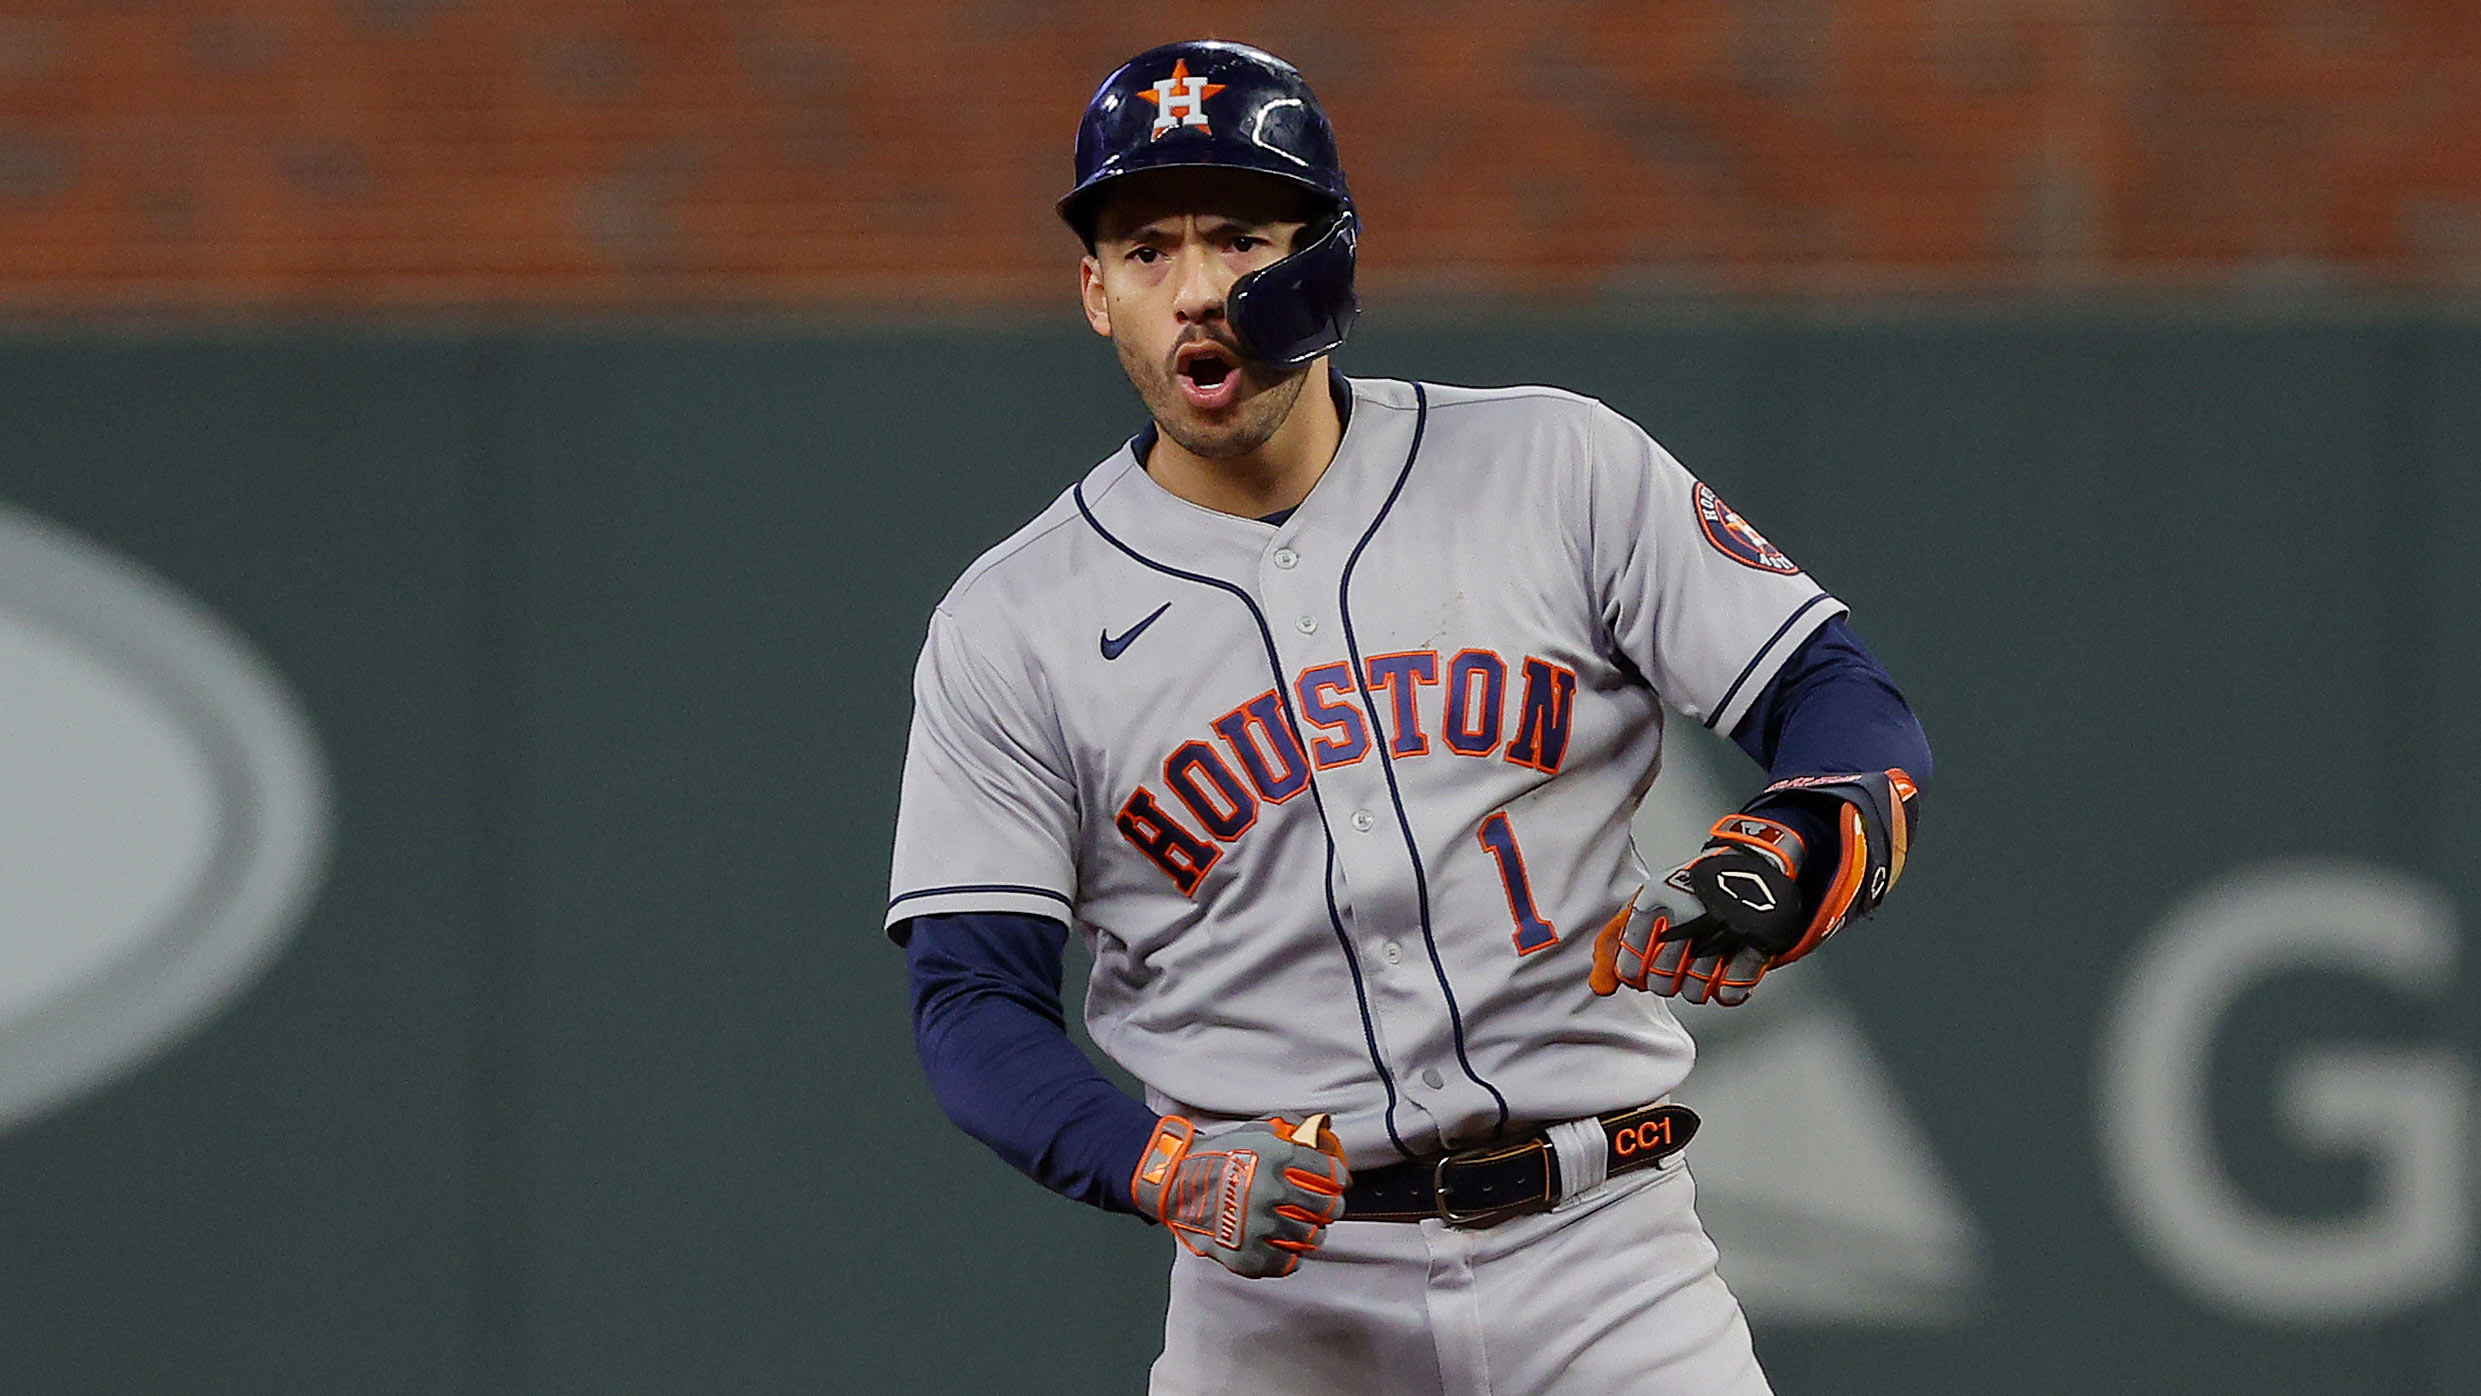 Carlos Correa of the Astros celebrates after hitting an RBI double during the third inning.